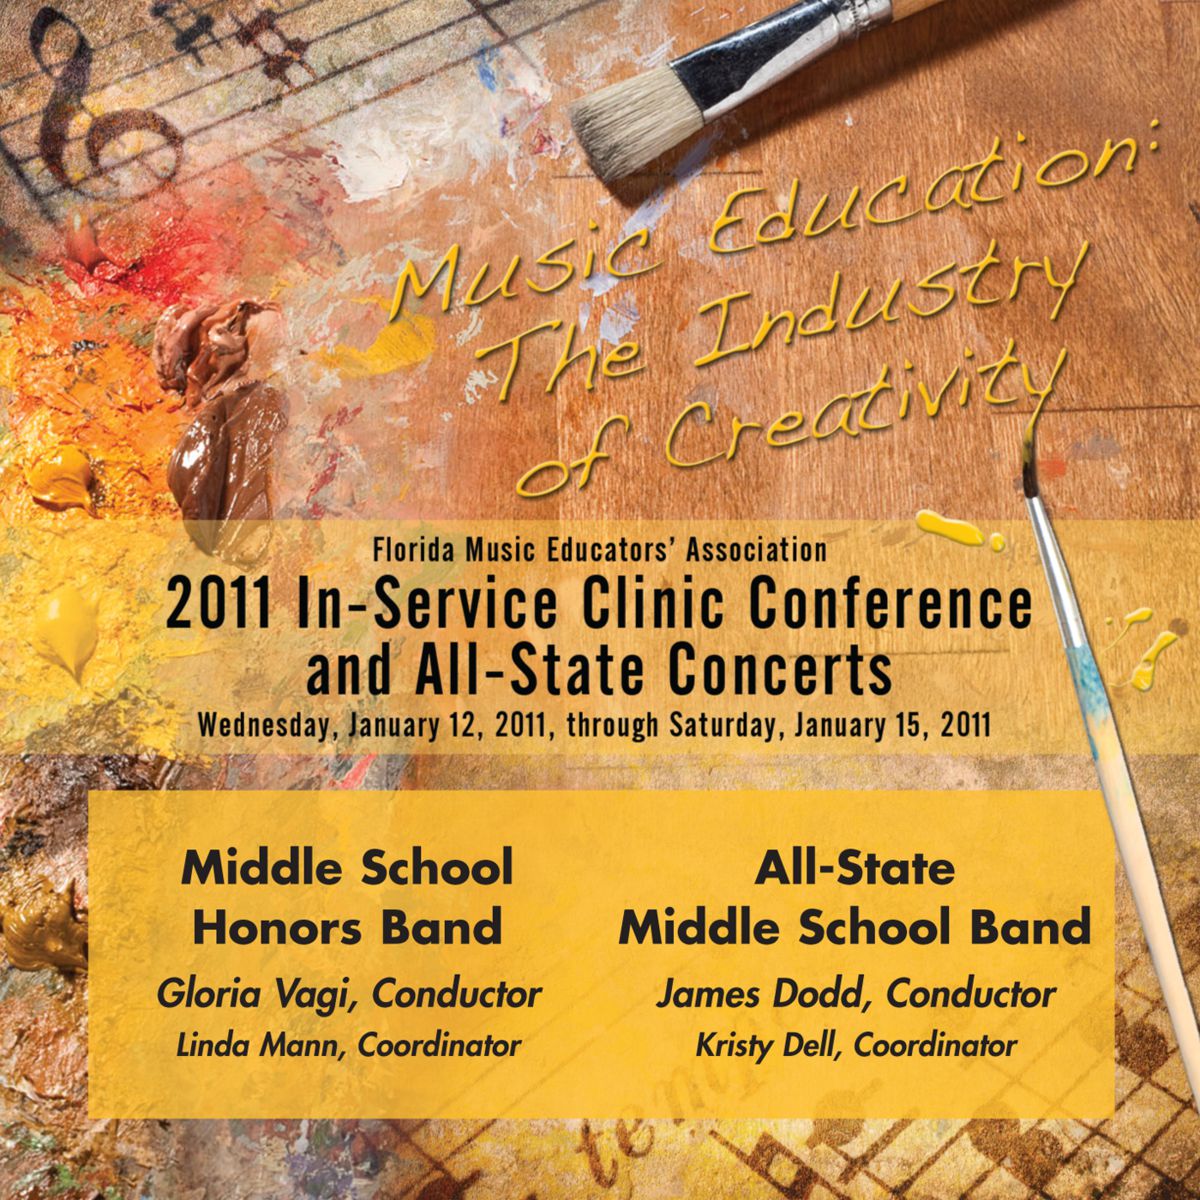 2011 Florida Music Educators Association: Middle School Honors Band and All-State Middle School Band - hacer clic aqu